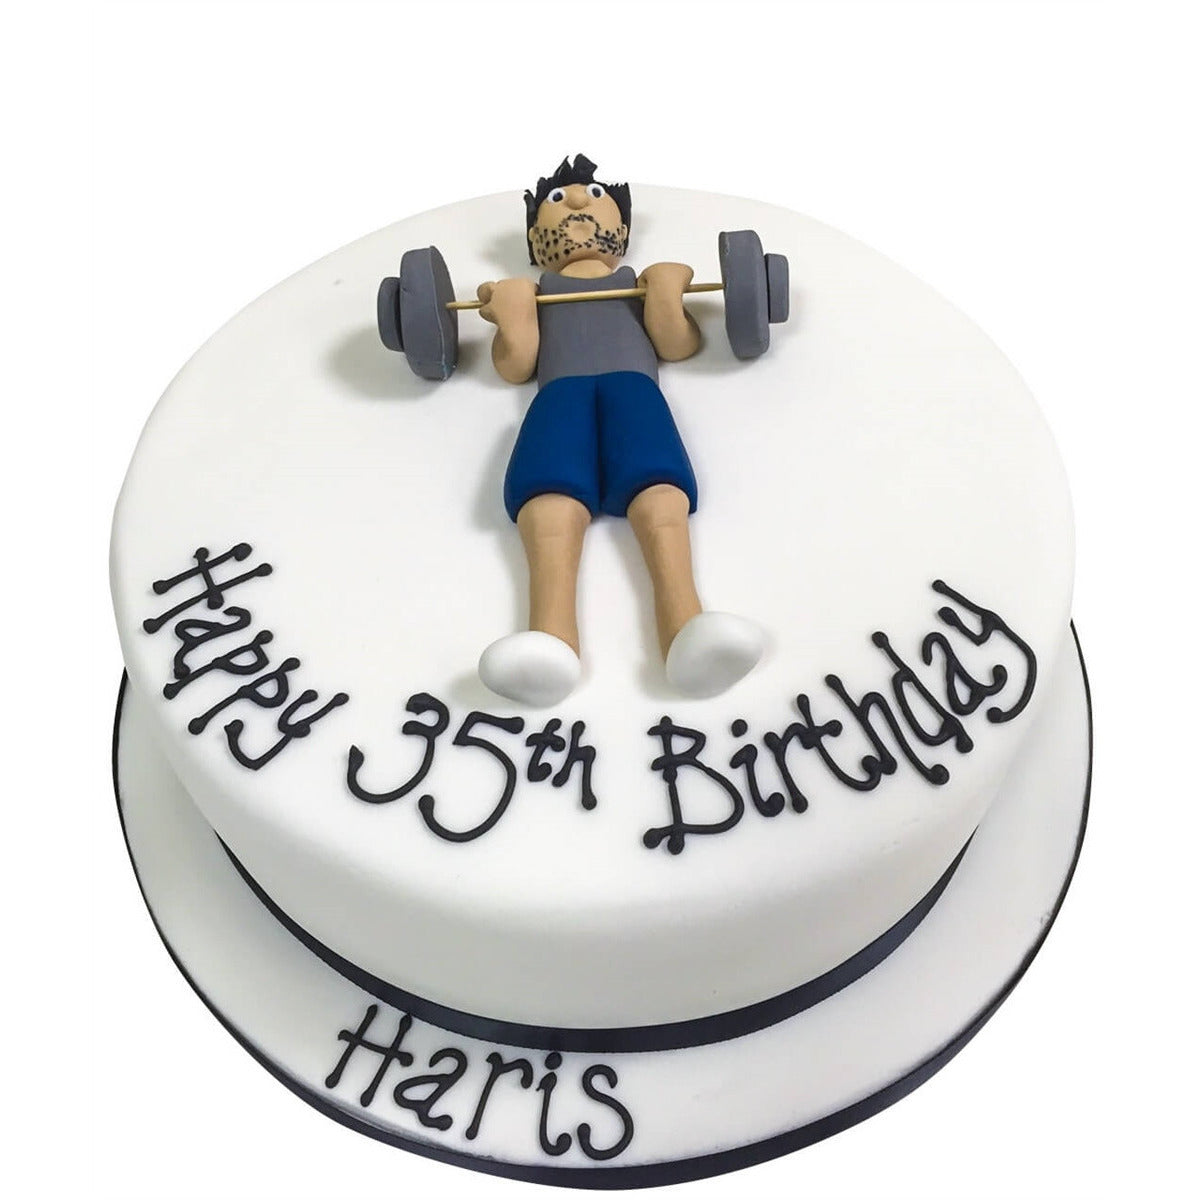 Weightlifting cake | Birthday cakes for men, Funny birthday cakes, 21st birthday  cakes